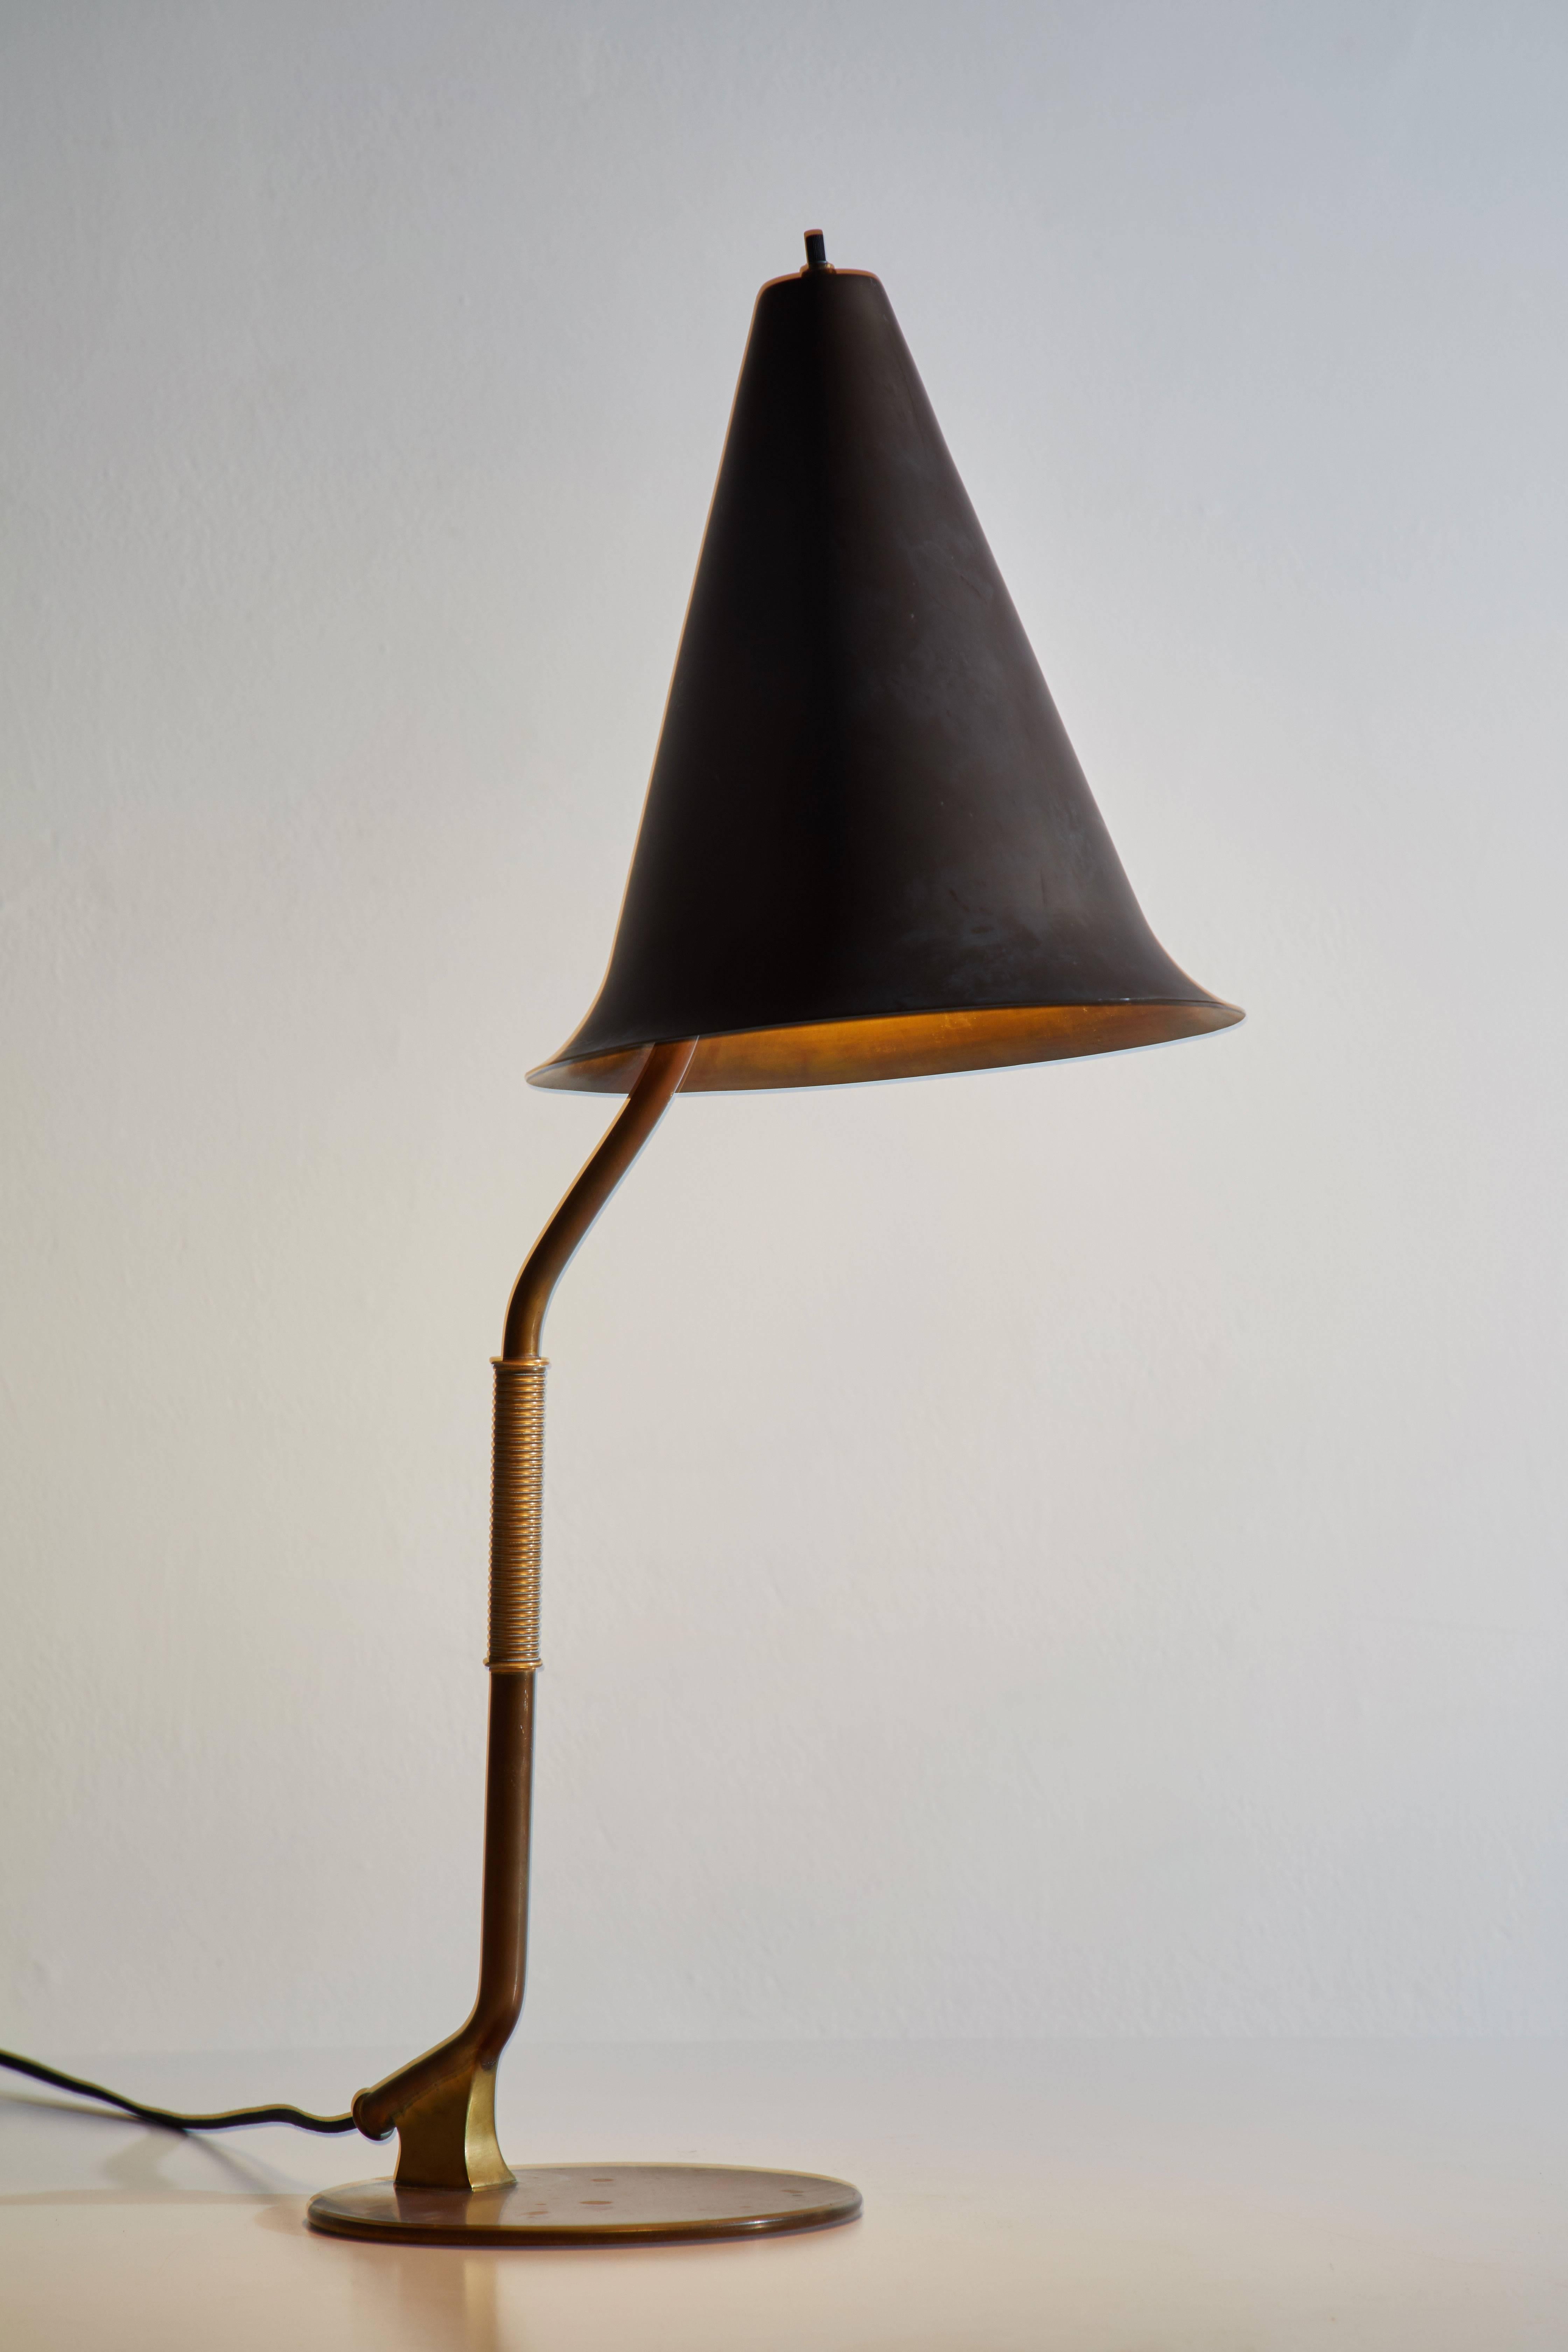 Rare and important table lamp designed in Sweden, circa 1940s. Rewired with black French twist cord. Beautifully patinated brass. Retains original impressed stamp Made in Sweden to base of lamp. Takes one E27 75w maximum bulb.